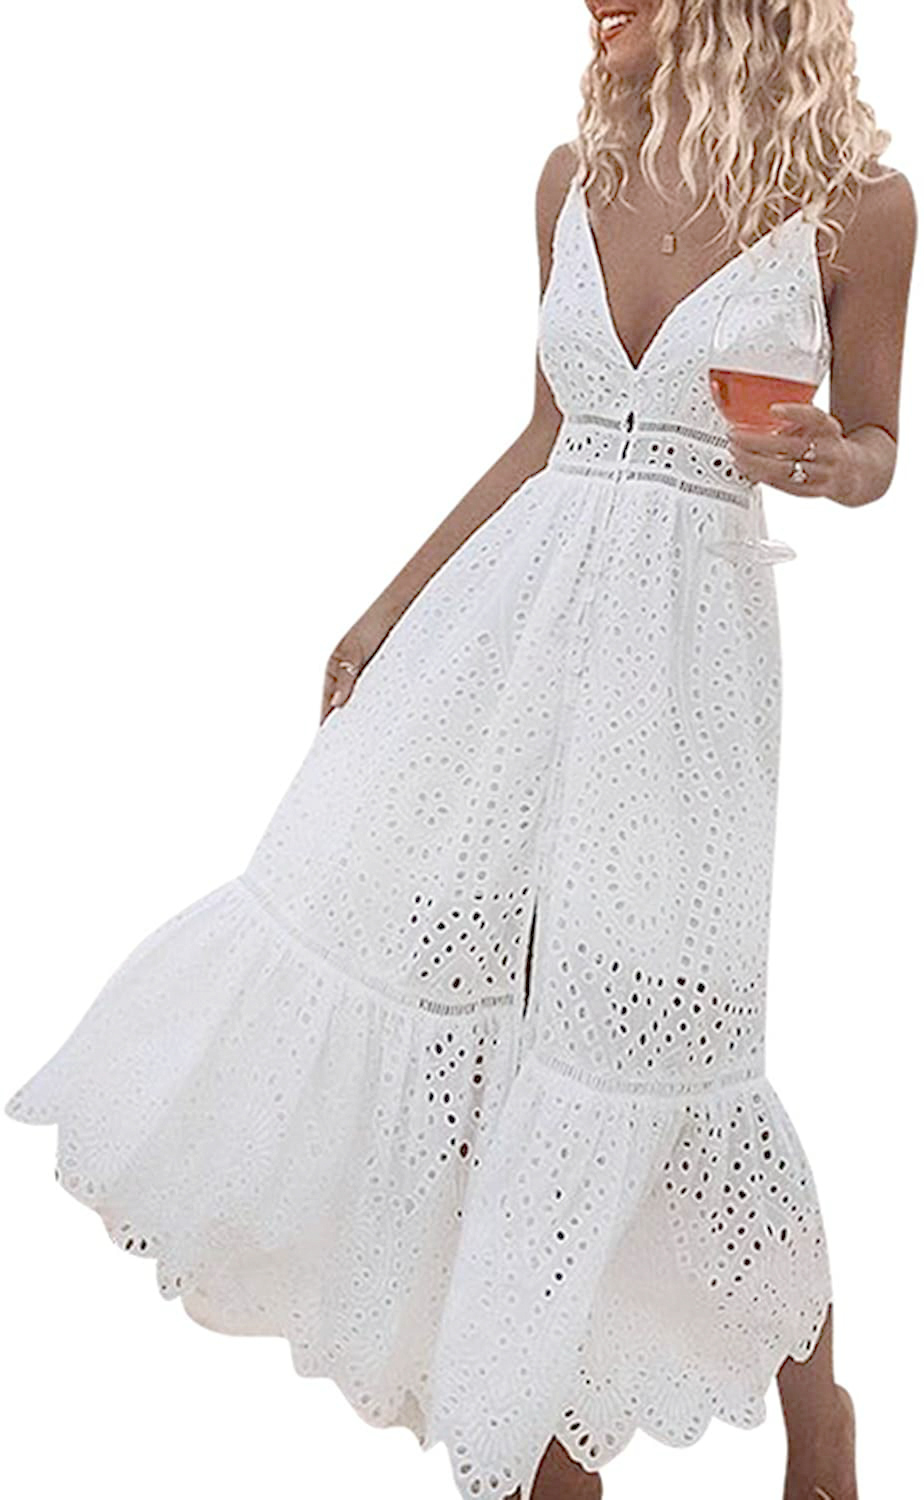 Buy > cute casual white dresses > in stock